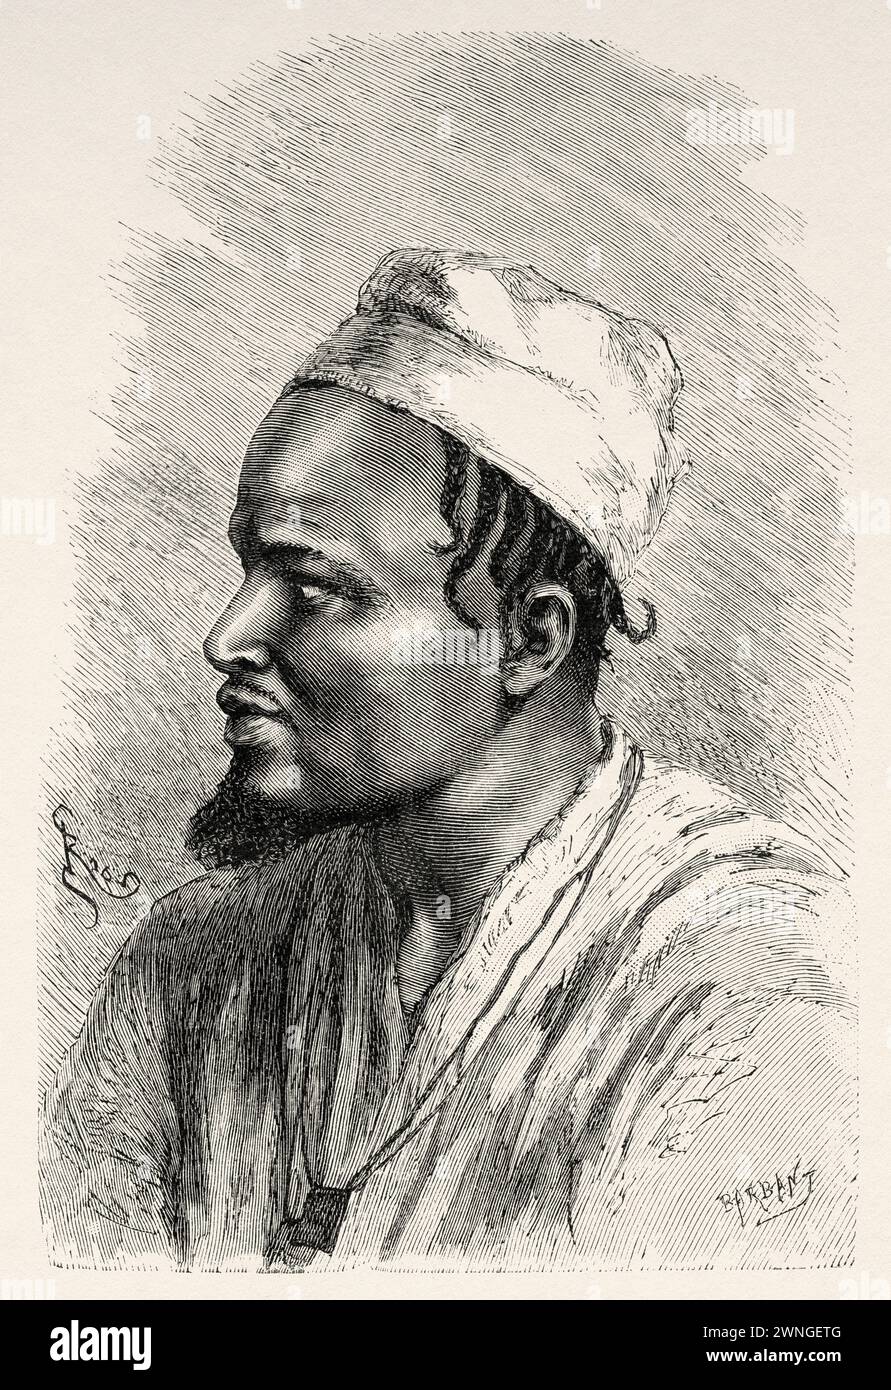 Alfa Mamadou Pathé, big brother of Almamy Bocar Biro Barry, last Overlord of Fouta before colonial penetration, Guinea. Africa. Two campaigns in French Sudan, 1886-1888 by Joseph Simon Gallieni (1849 - 1916) Le Tour du Monde 1890 Stock Photo